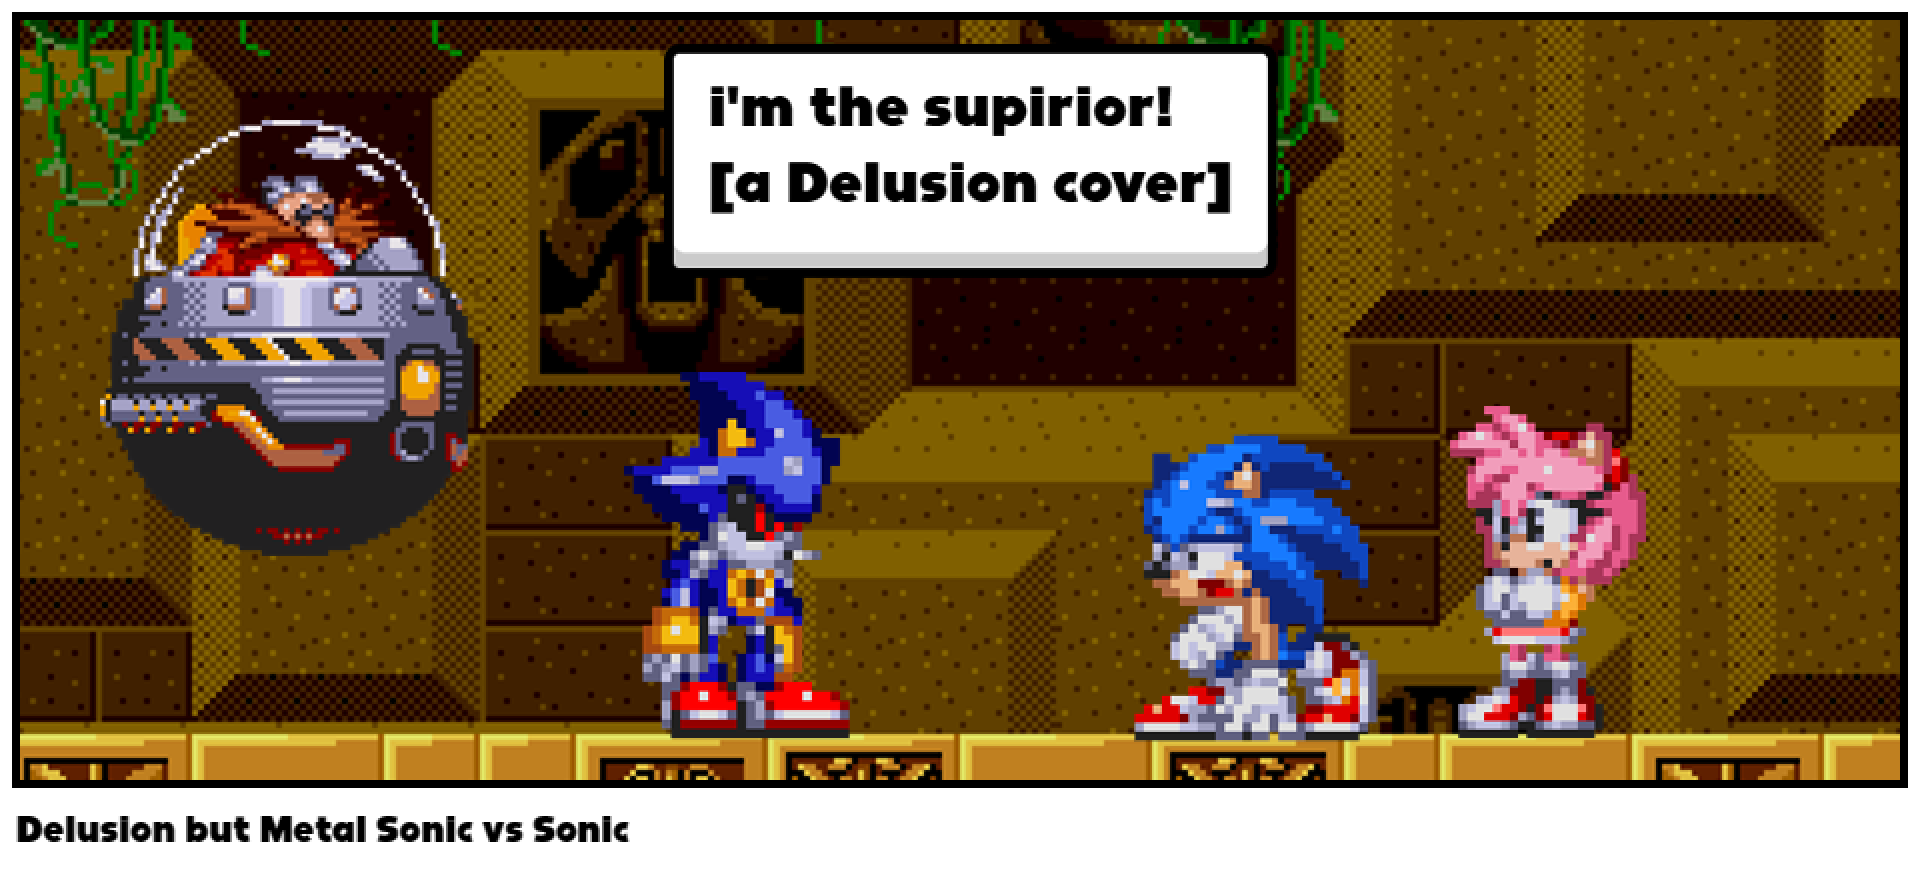 Delusion but Metal Sonic vs Sonic